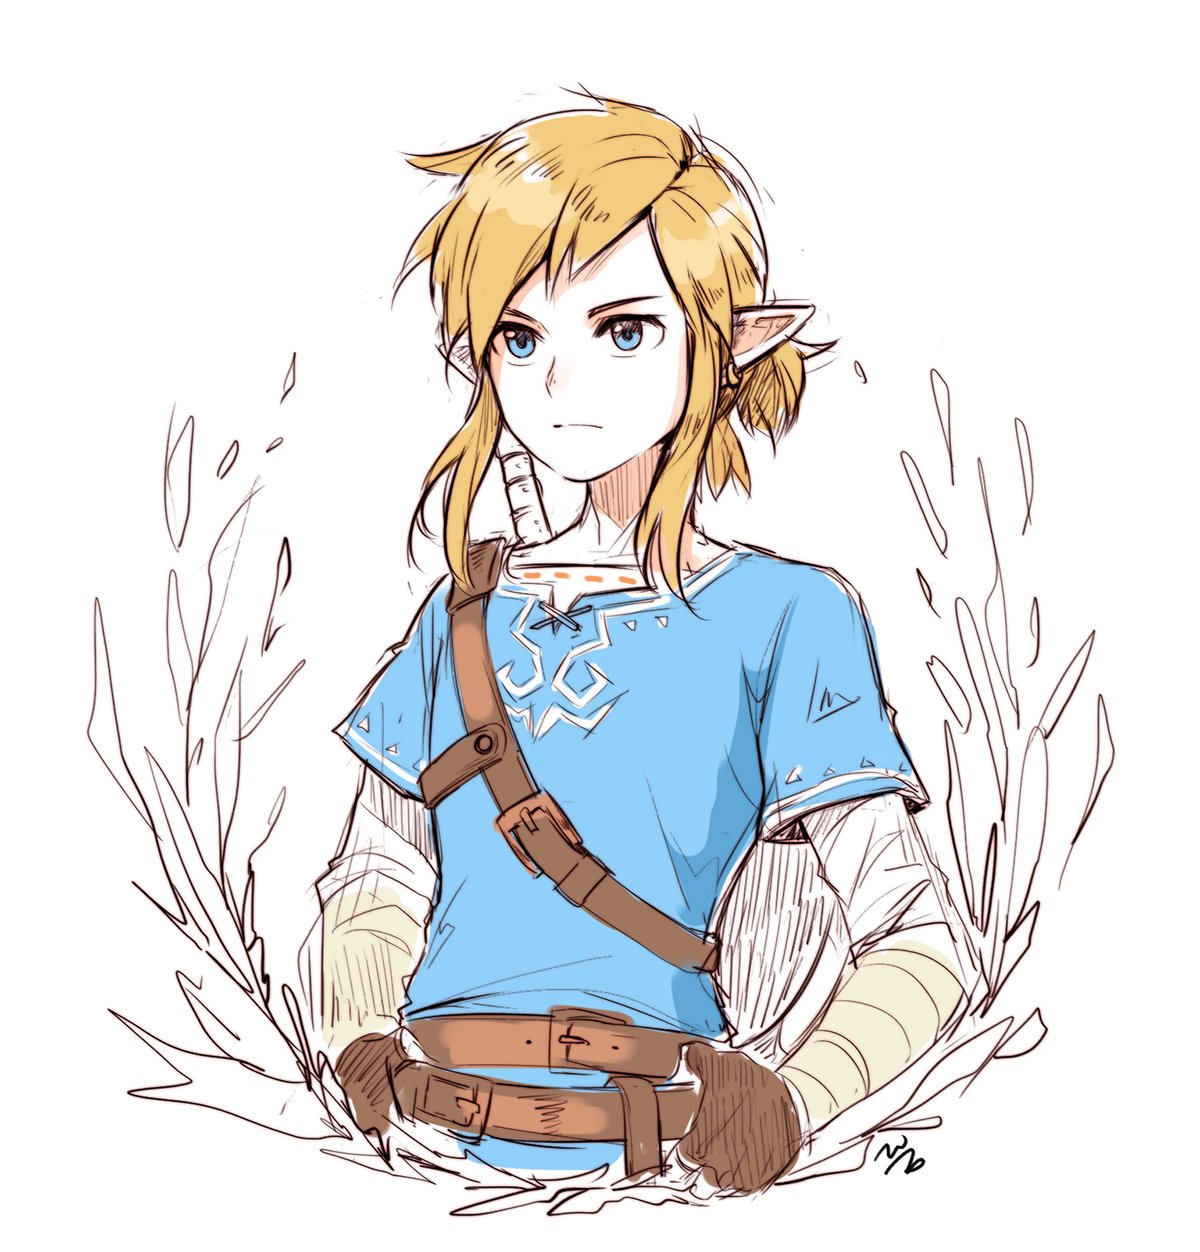 Their link link. Линк Breath of the Wild. Линк Зельда Legend of Wild. Линк Легенда о Зельде Breath of the Wild. Линк и Зельда BOTW.